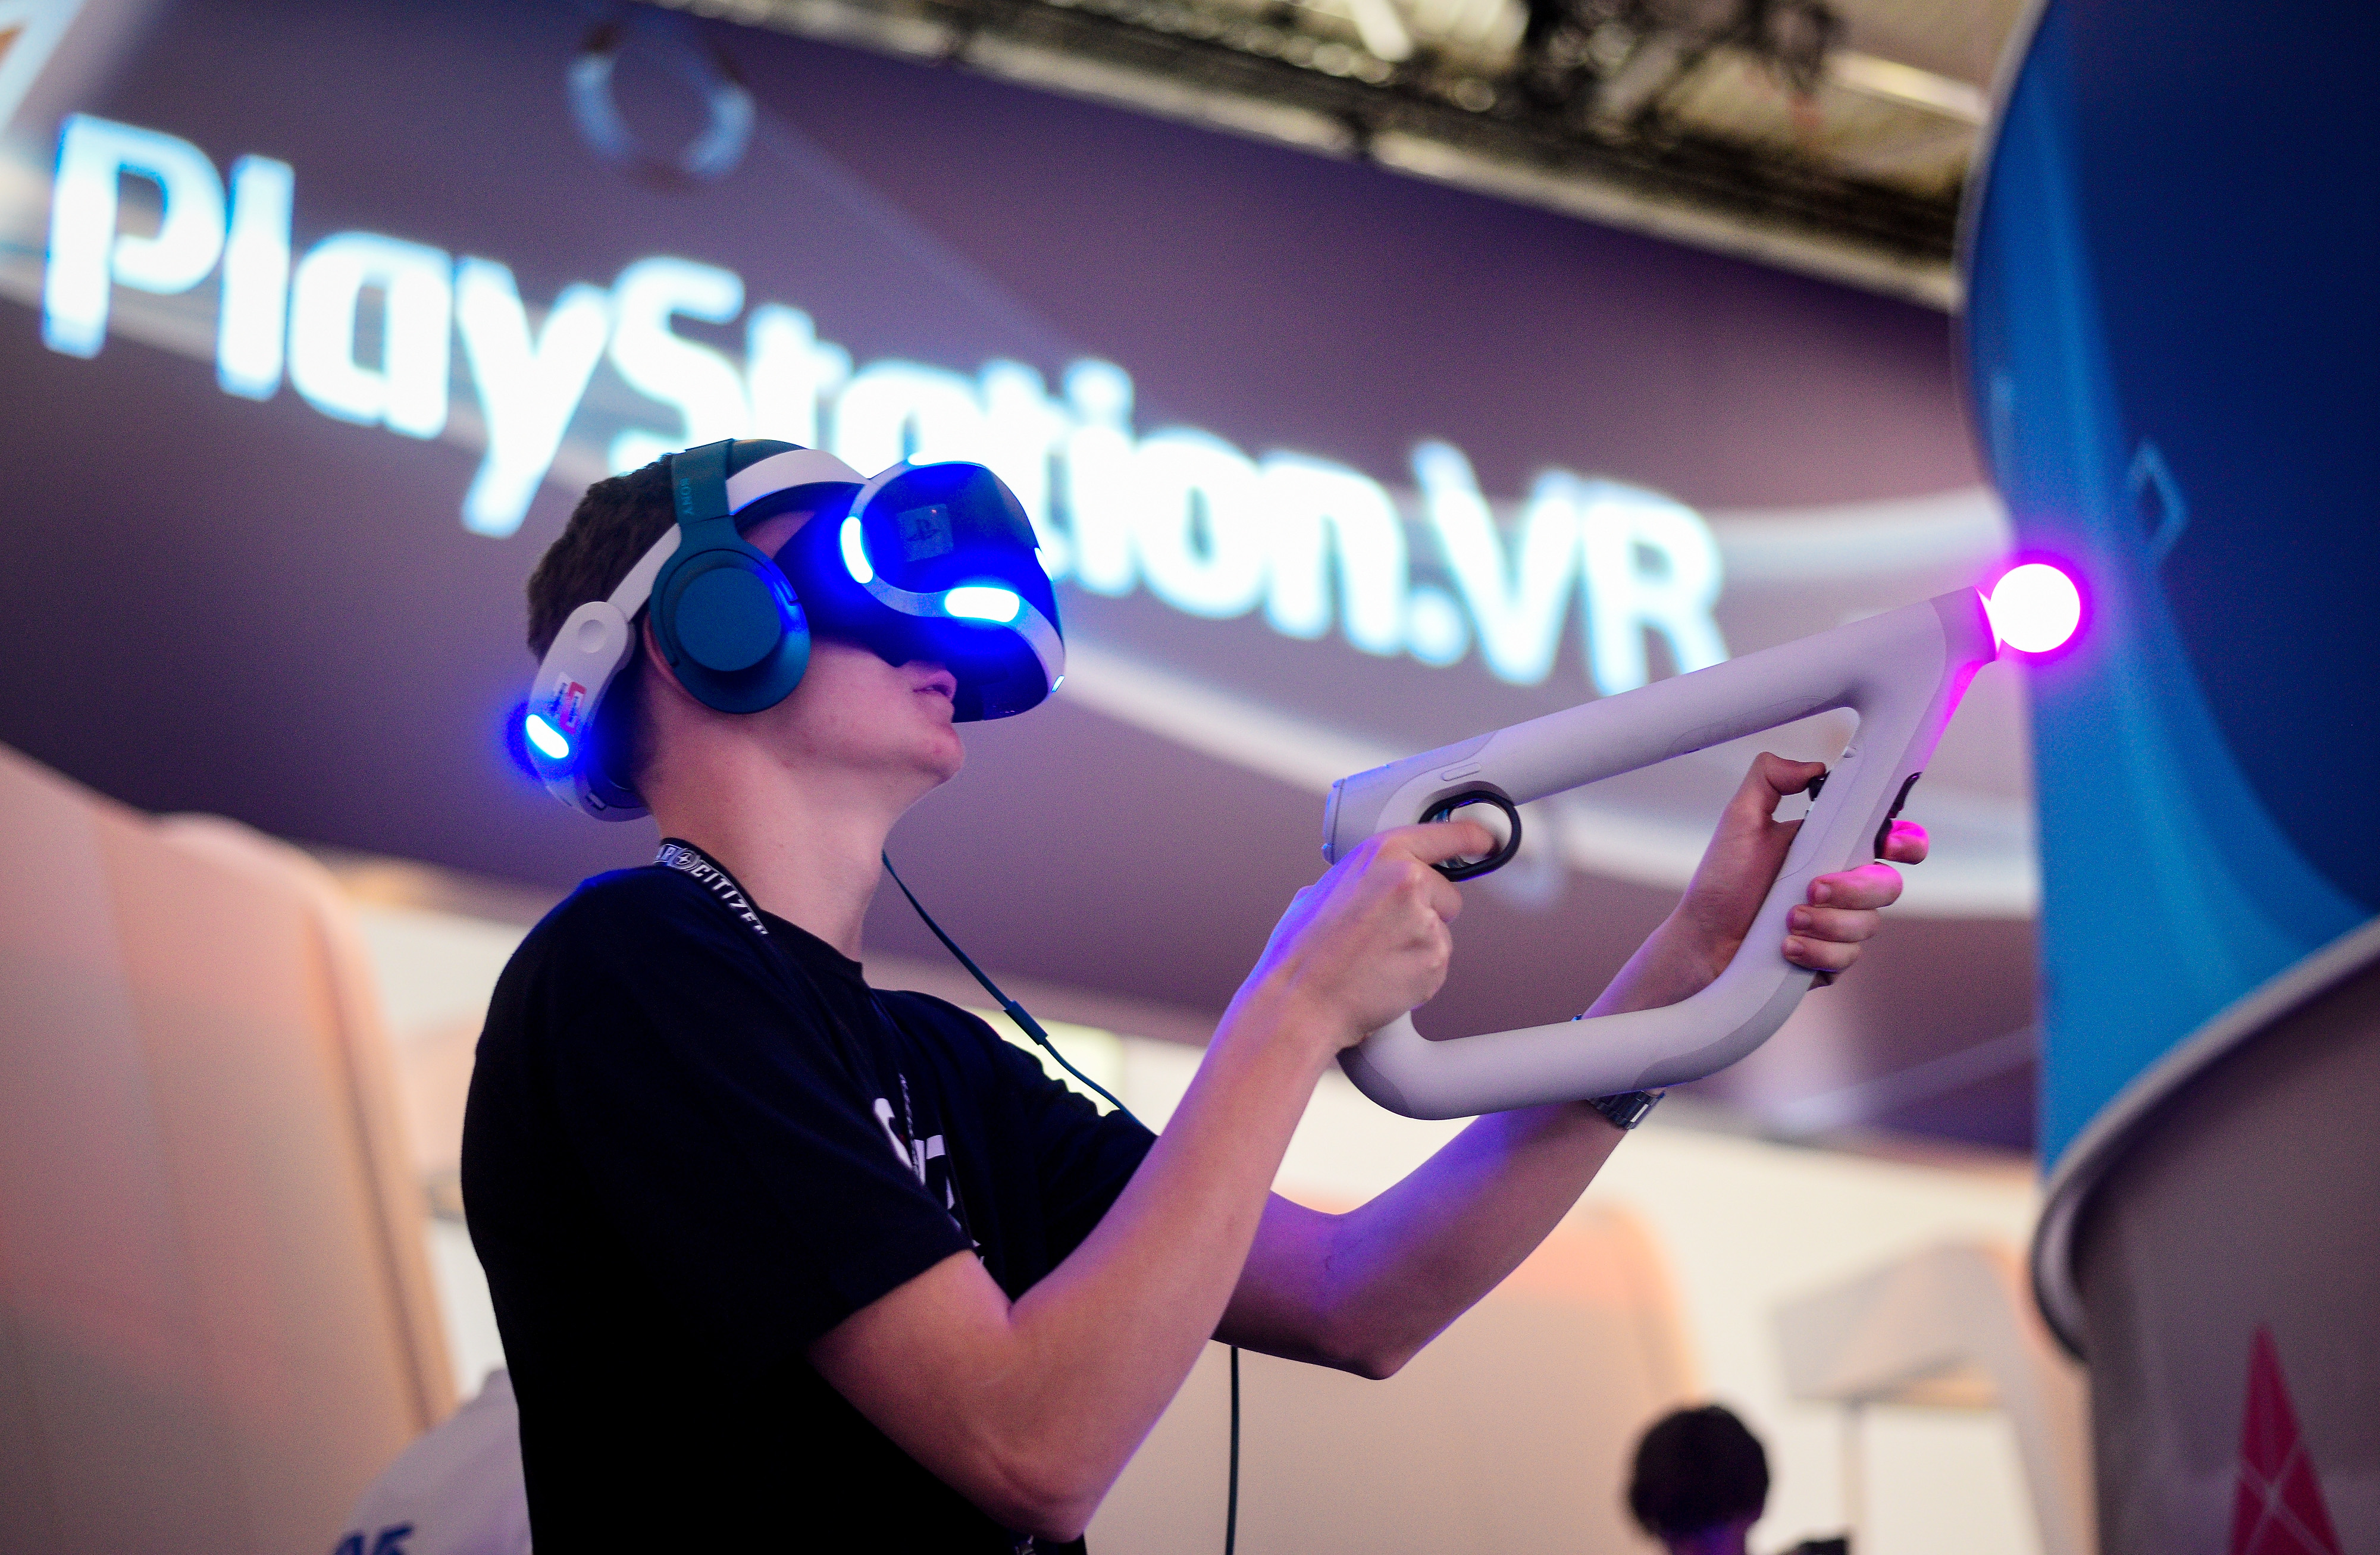 A Visitor try out a VR game at the Sony Play Station stand at the Gamescom 2016 gaming trade fair during the media day on August 17, 2016 in Cologne, Germany. (Sascha Schuermann&mdash;Getty Images)